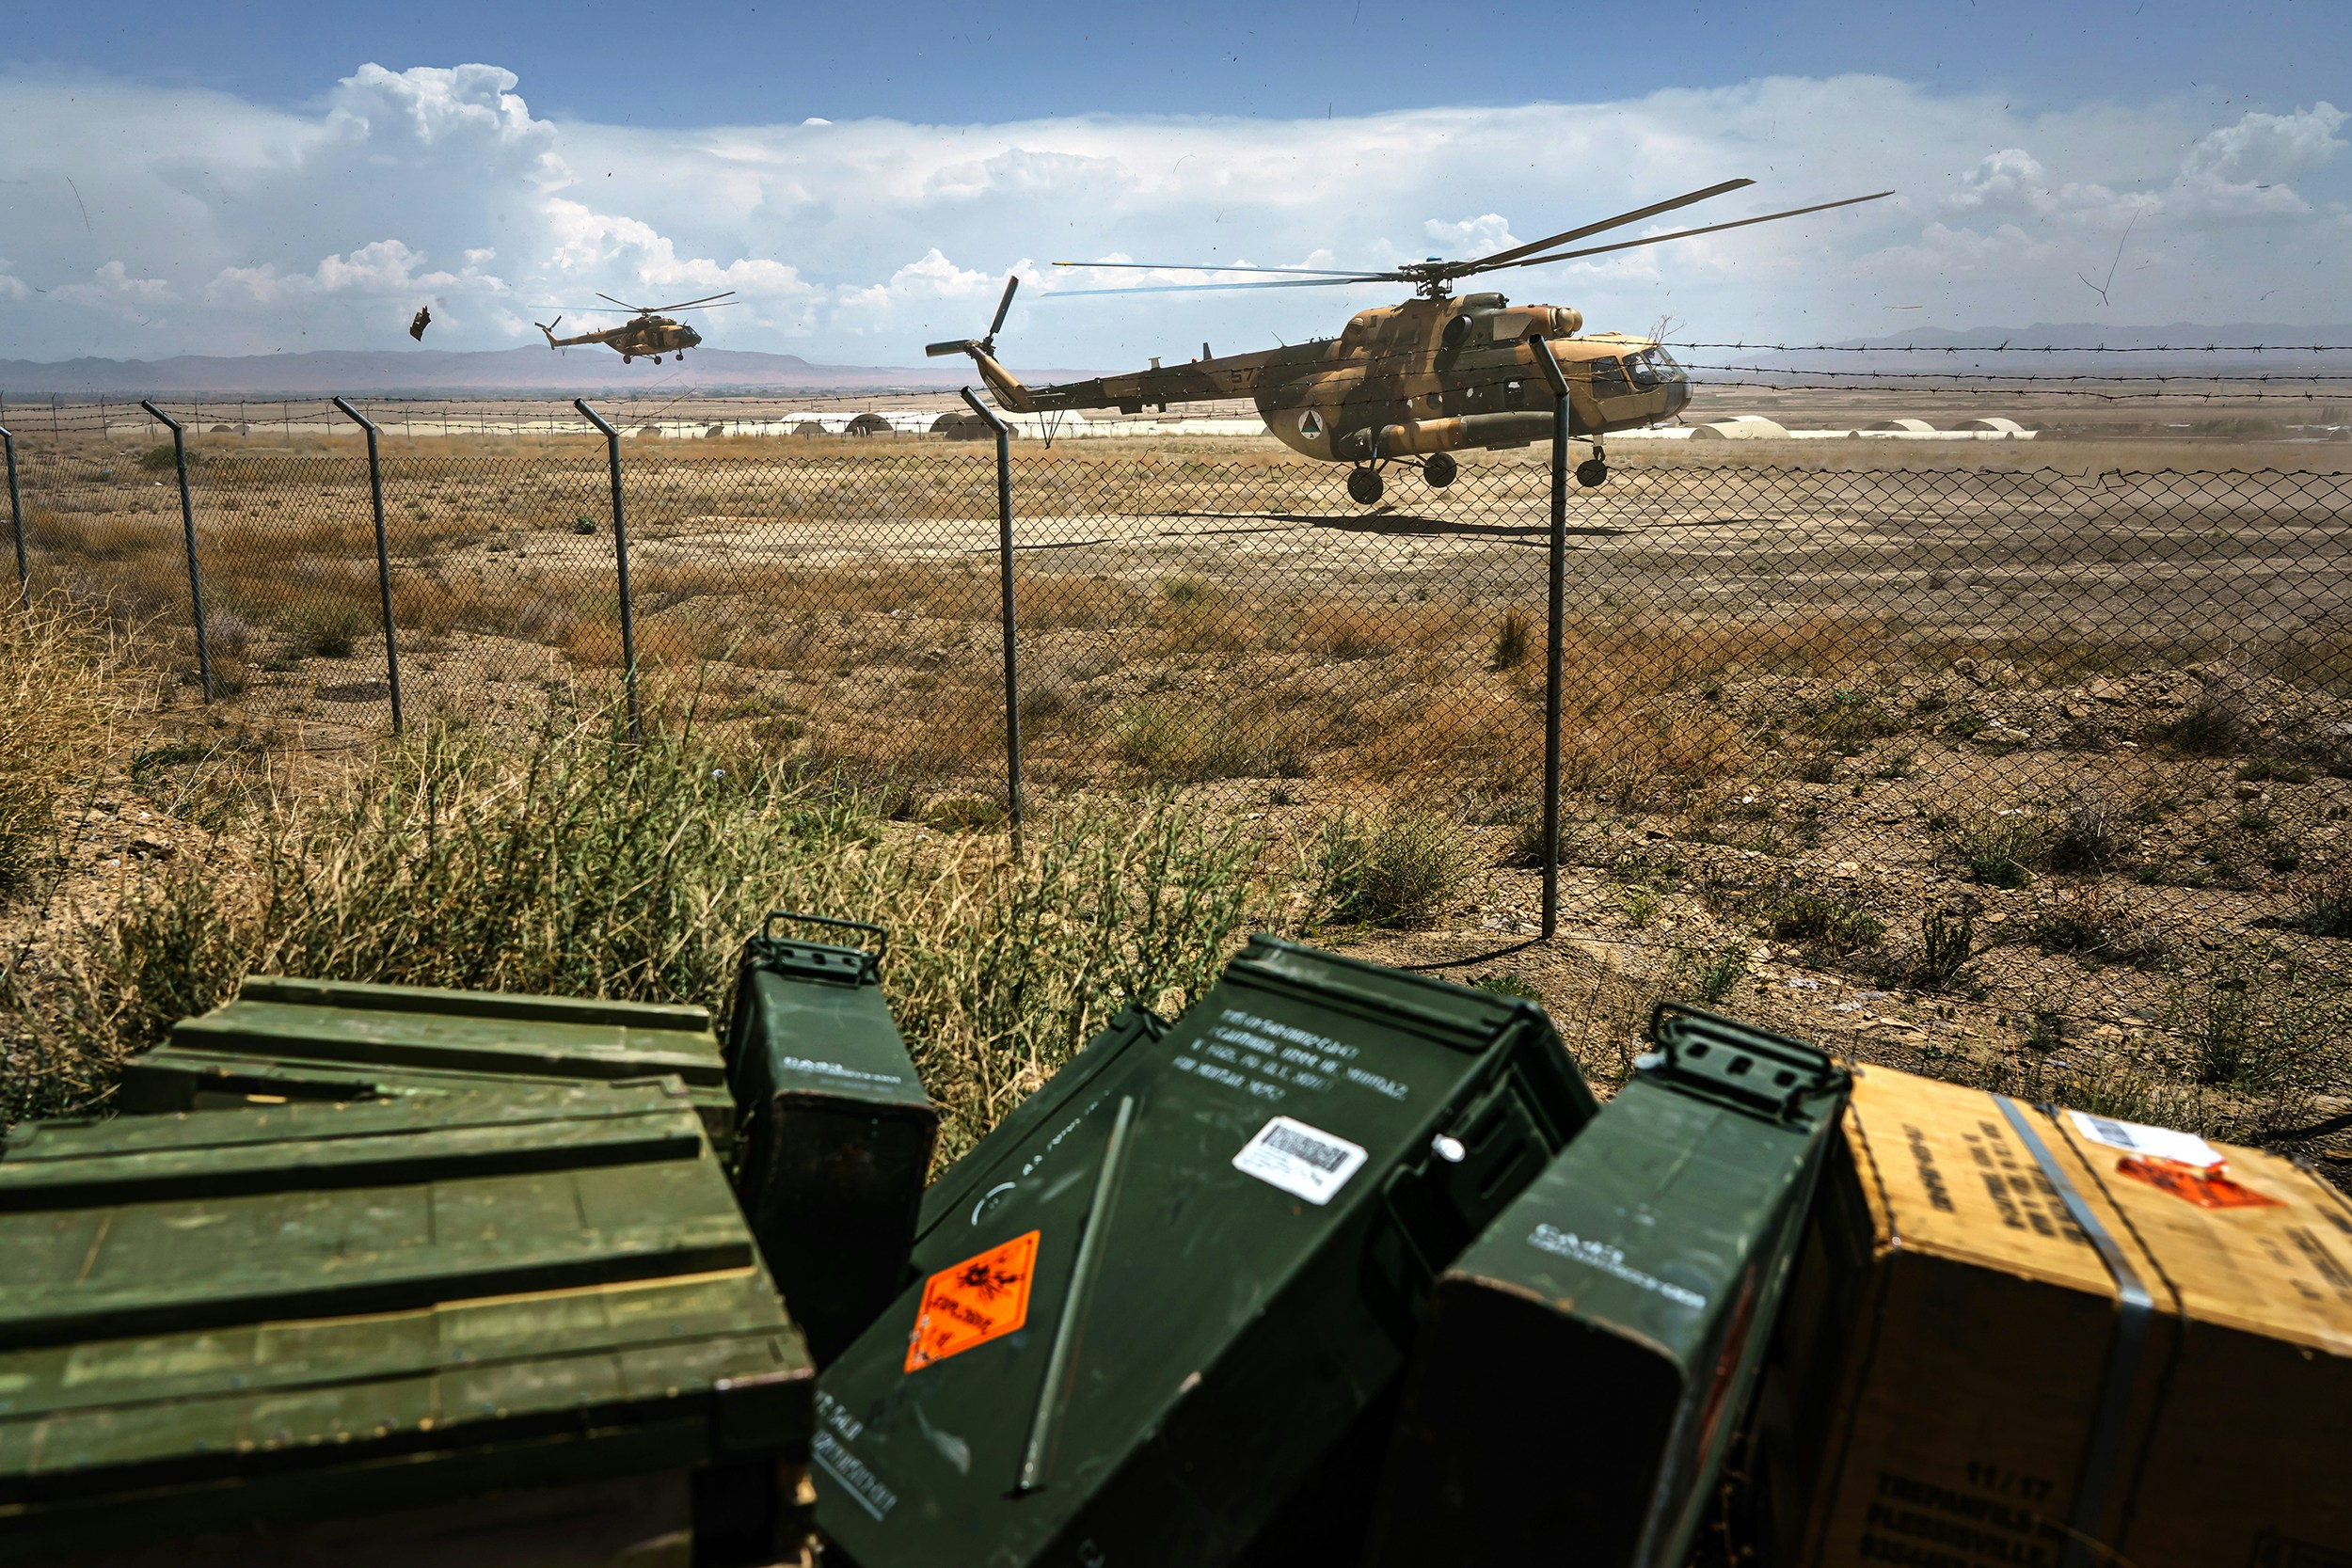 An Afghan Mi-17 lands during a resupply mission to an outpost in Ghazni Province, Afghanistan, Sunday, May 9, 2021. The Afghan Air Force, which the U.S. and its partners has nurtured to the tune of $8.5 billion since 2010, is now the governmentÕs spearhead in its fight against the Taliban. Since May 1, the original deadline for the U.S. withdrawal, the Taliban have overpowered government troops to take at least 23 districts to date, according to local media outlets. That has further denied Afghan security forces the use of roads, meaning all logistical support to the thousands of outposts and checkpoints Ñ including re-supplies of ammunition and food, medical evacuations or personnel rotation Ñ must be done by air. (MARCUS YAM / LOS ANGELES TIMES)